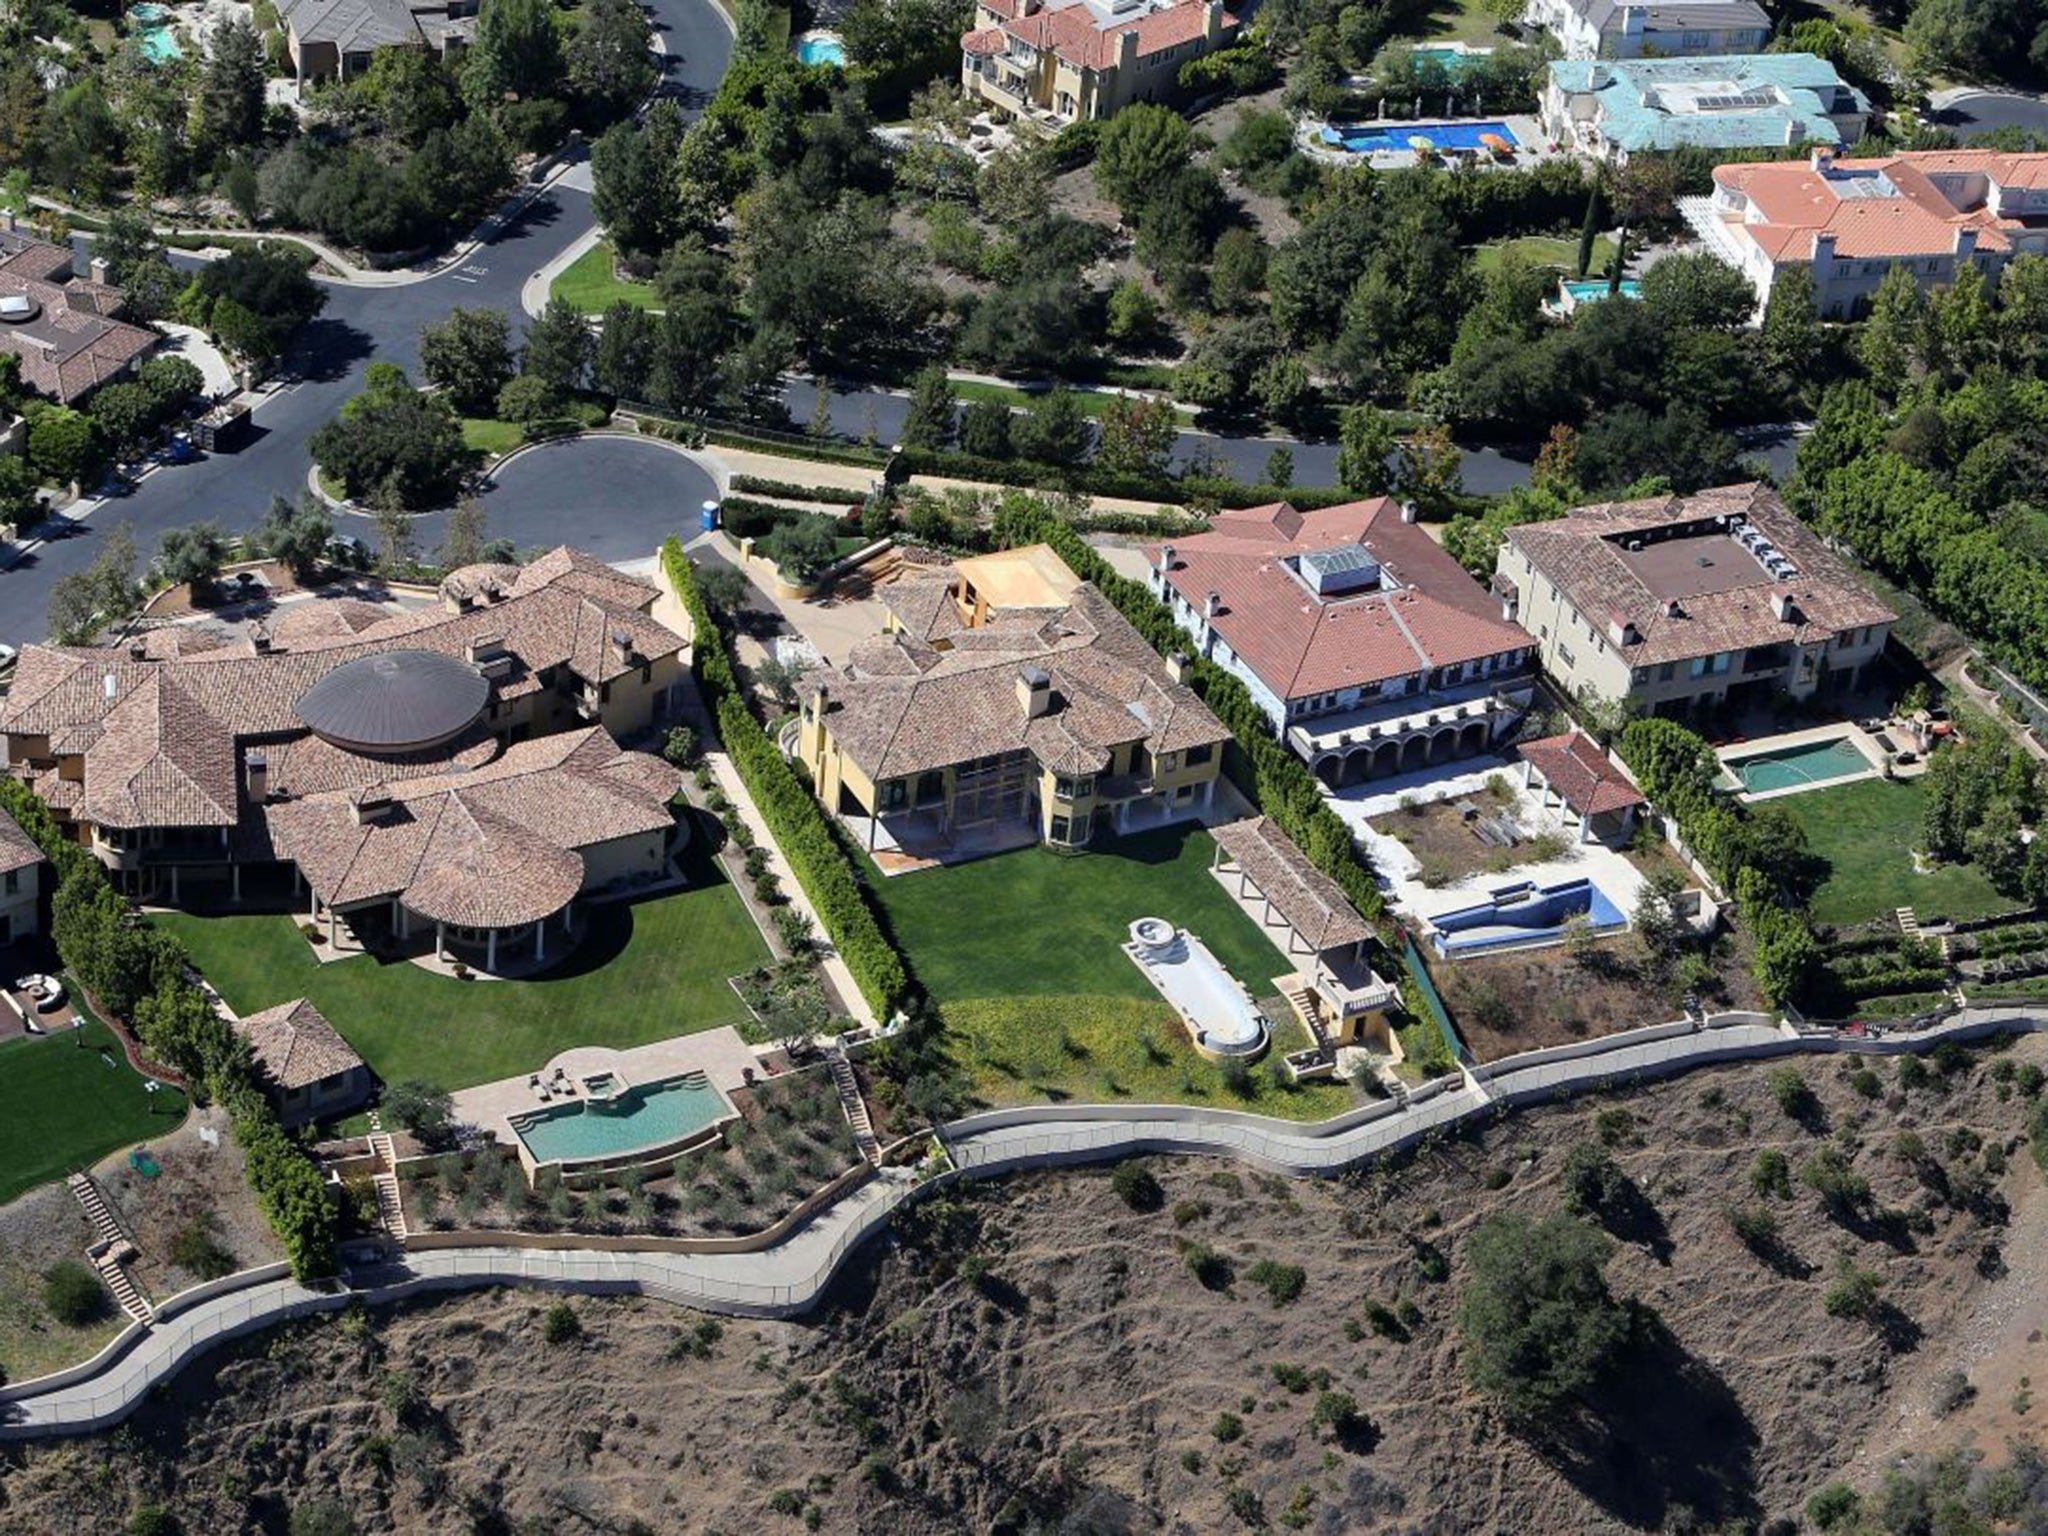 Kim Kardashian and Kanye West mansion in the Bel Air Crest neighborhood of Los Angeles, CA.